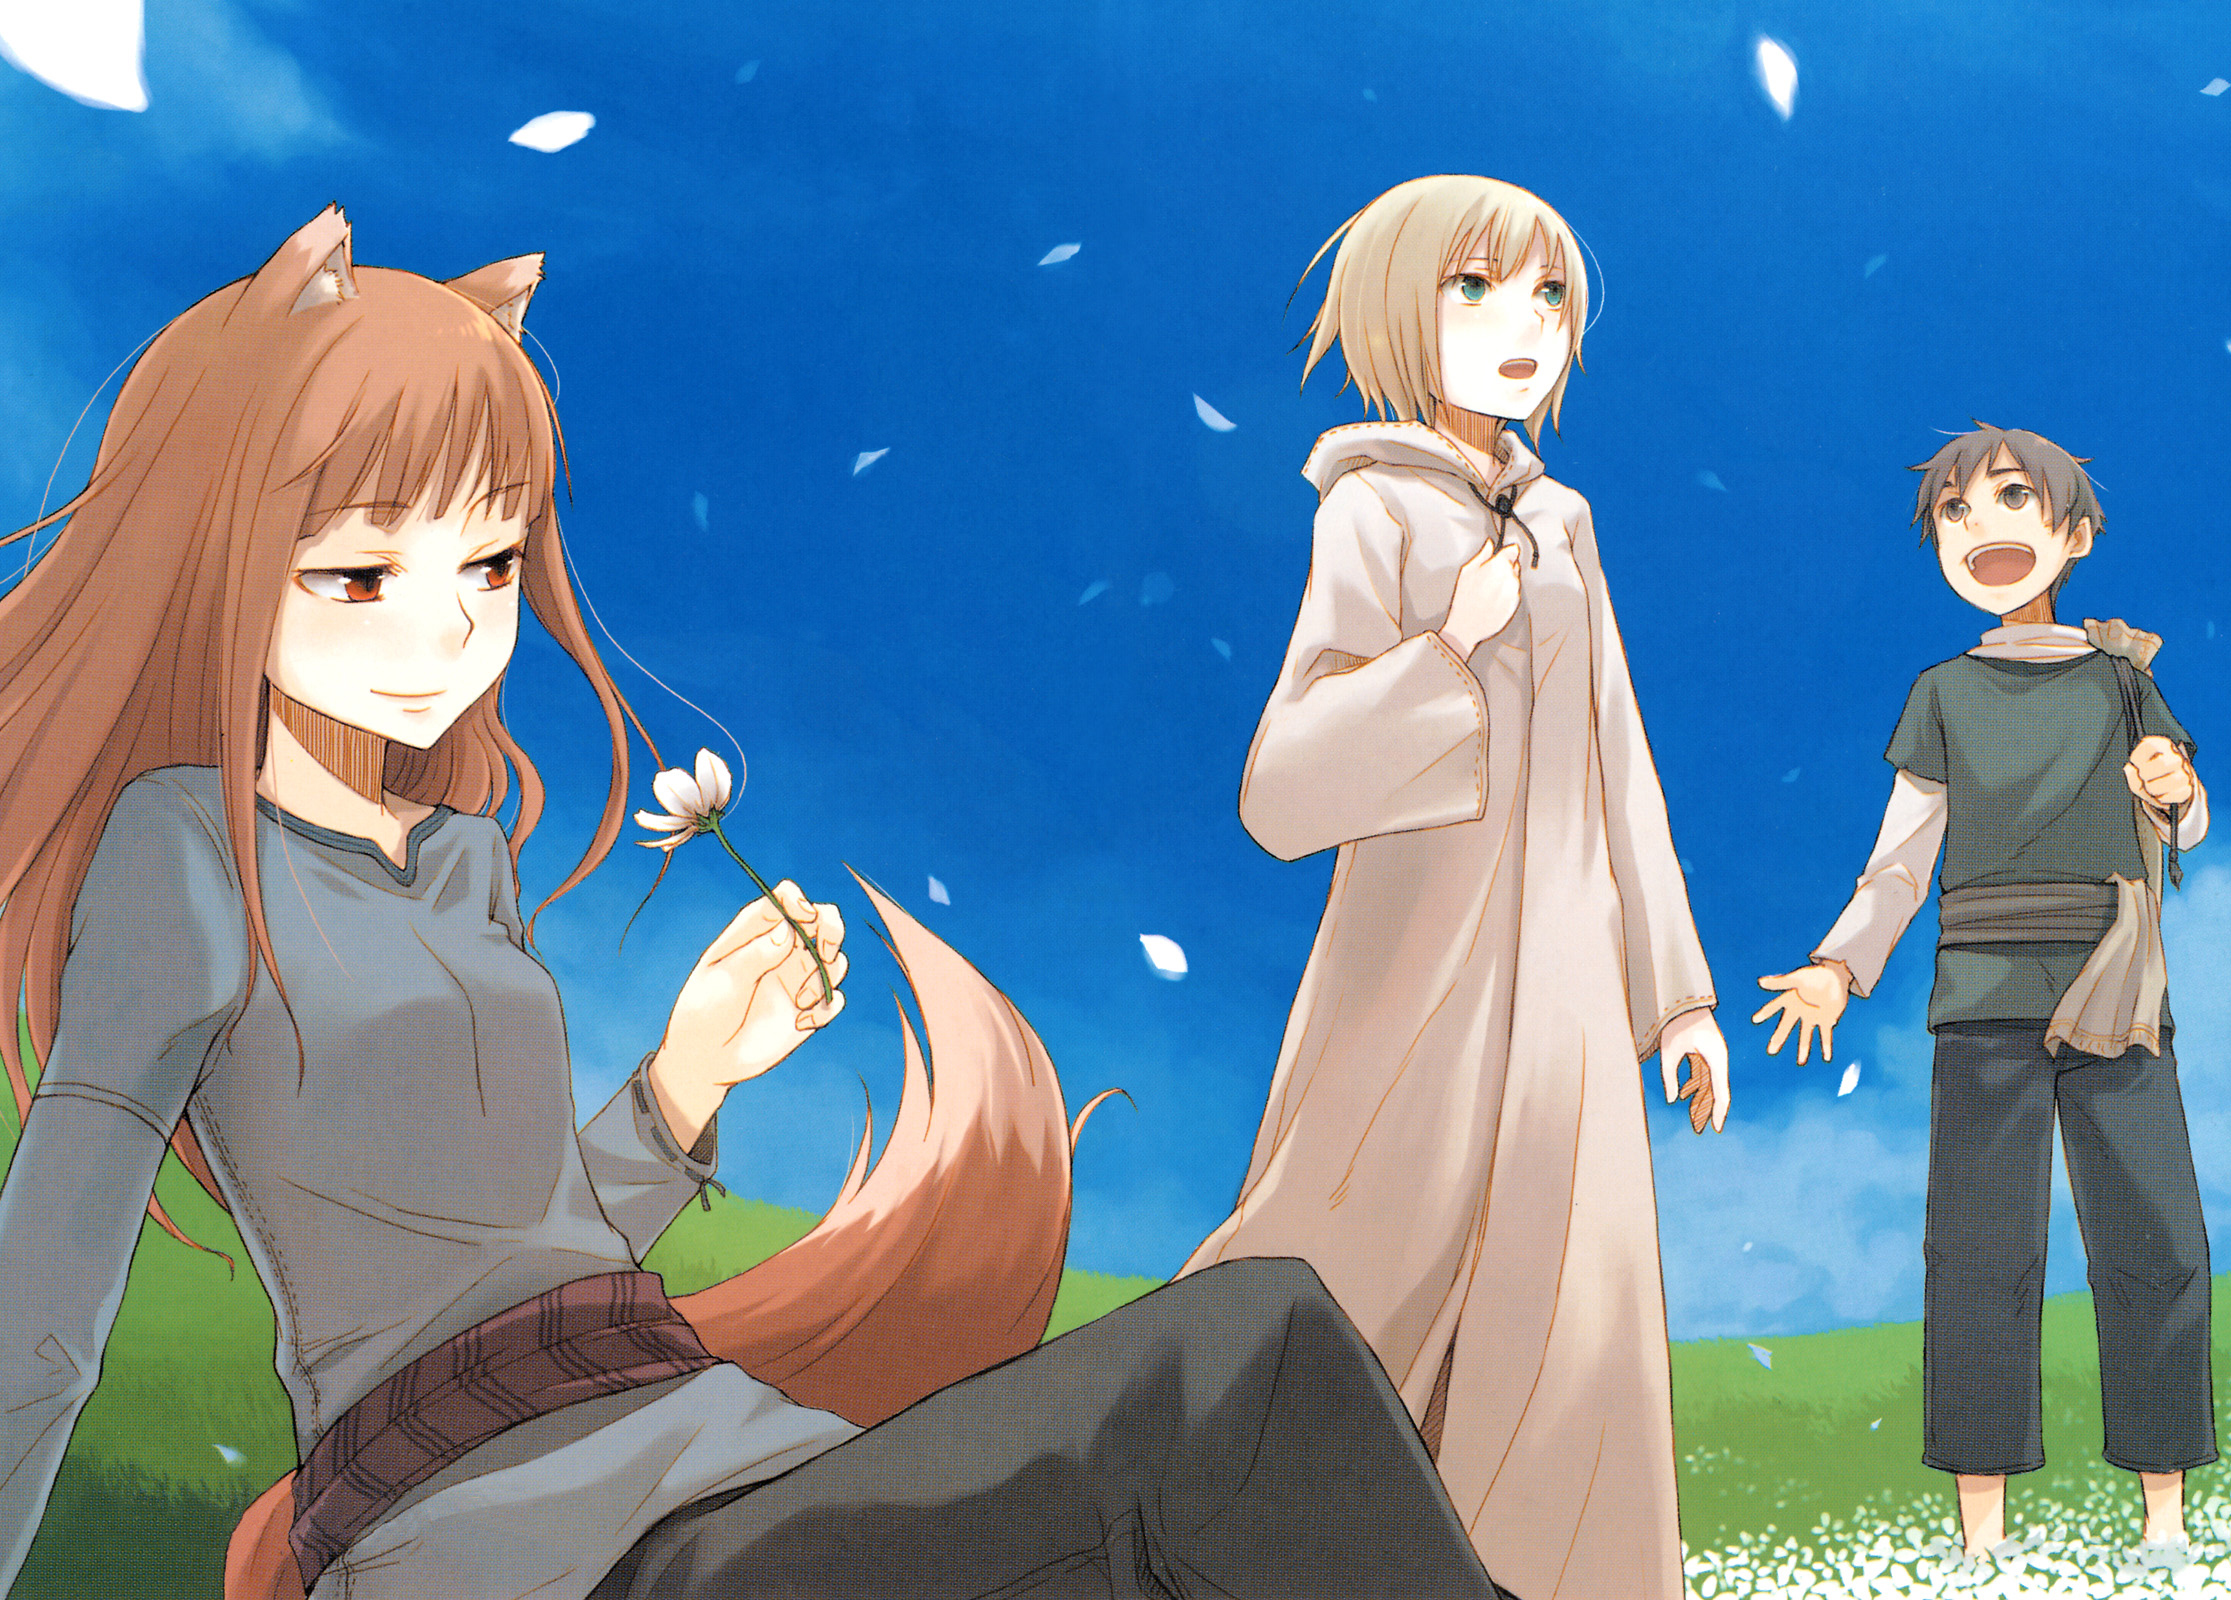 Holo from Spice & Wolf smiling in nature with animal ears, long blonde hair, and a flower.